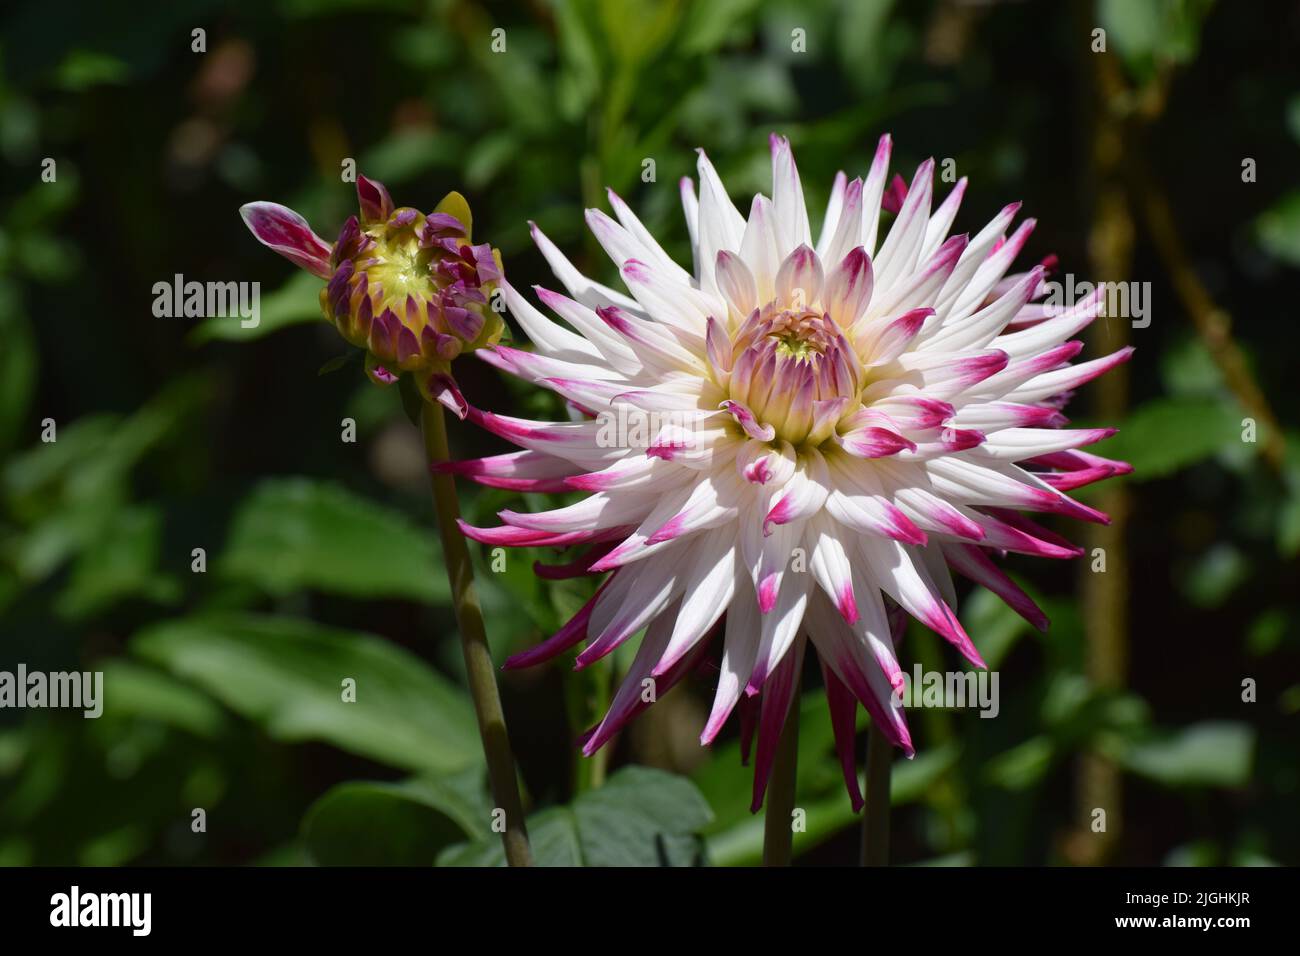 A beautiful cactus dahlia flower Dutch Explosion that has spiky pointed white petals with bright pink / purple tips Stock Photo